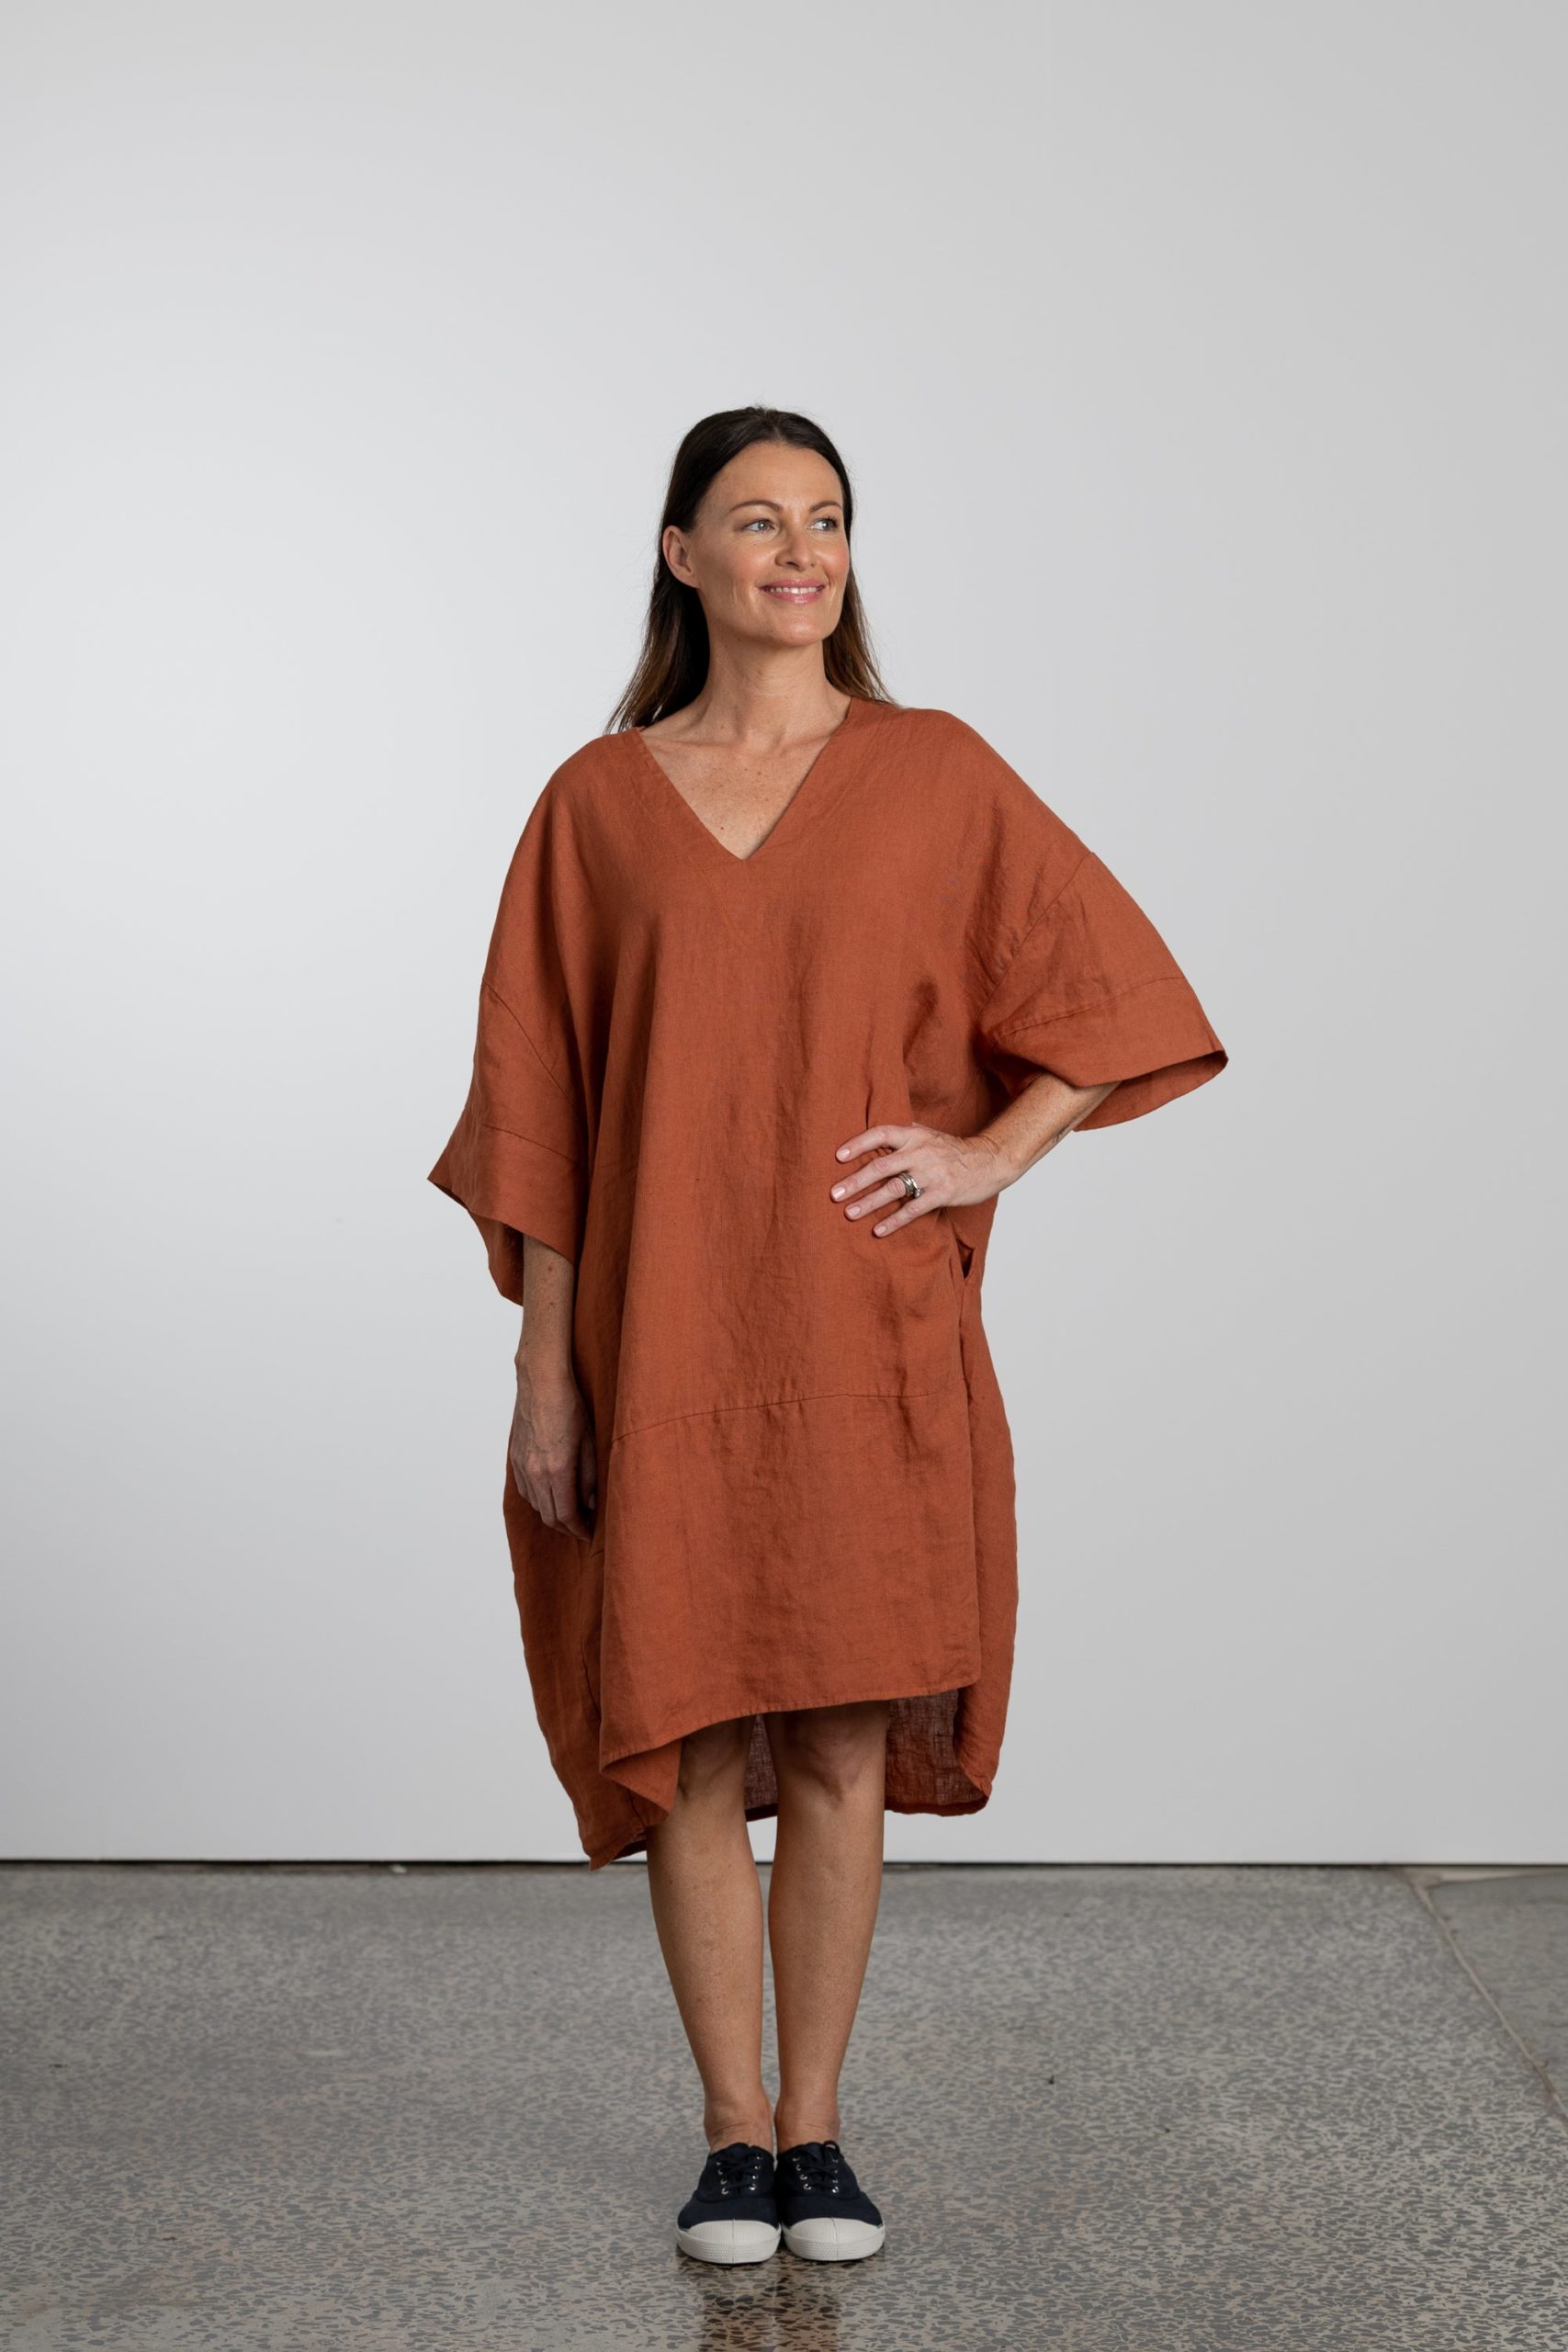 https://thedressingroom.co.nz/wp-content/uploads/2021/11/Natural-Linen-Oversized-Tunic-Dress-Front-scaled.jpg